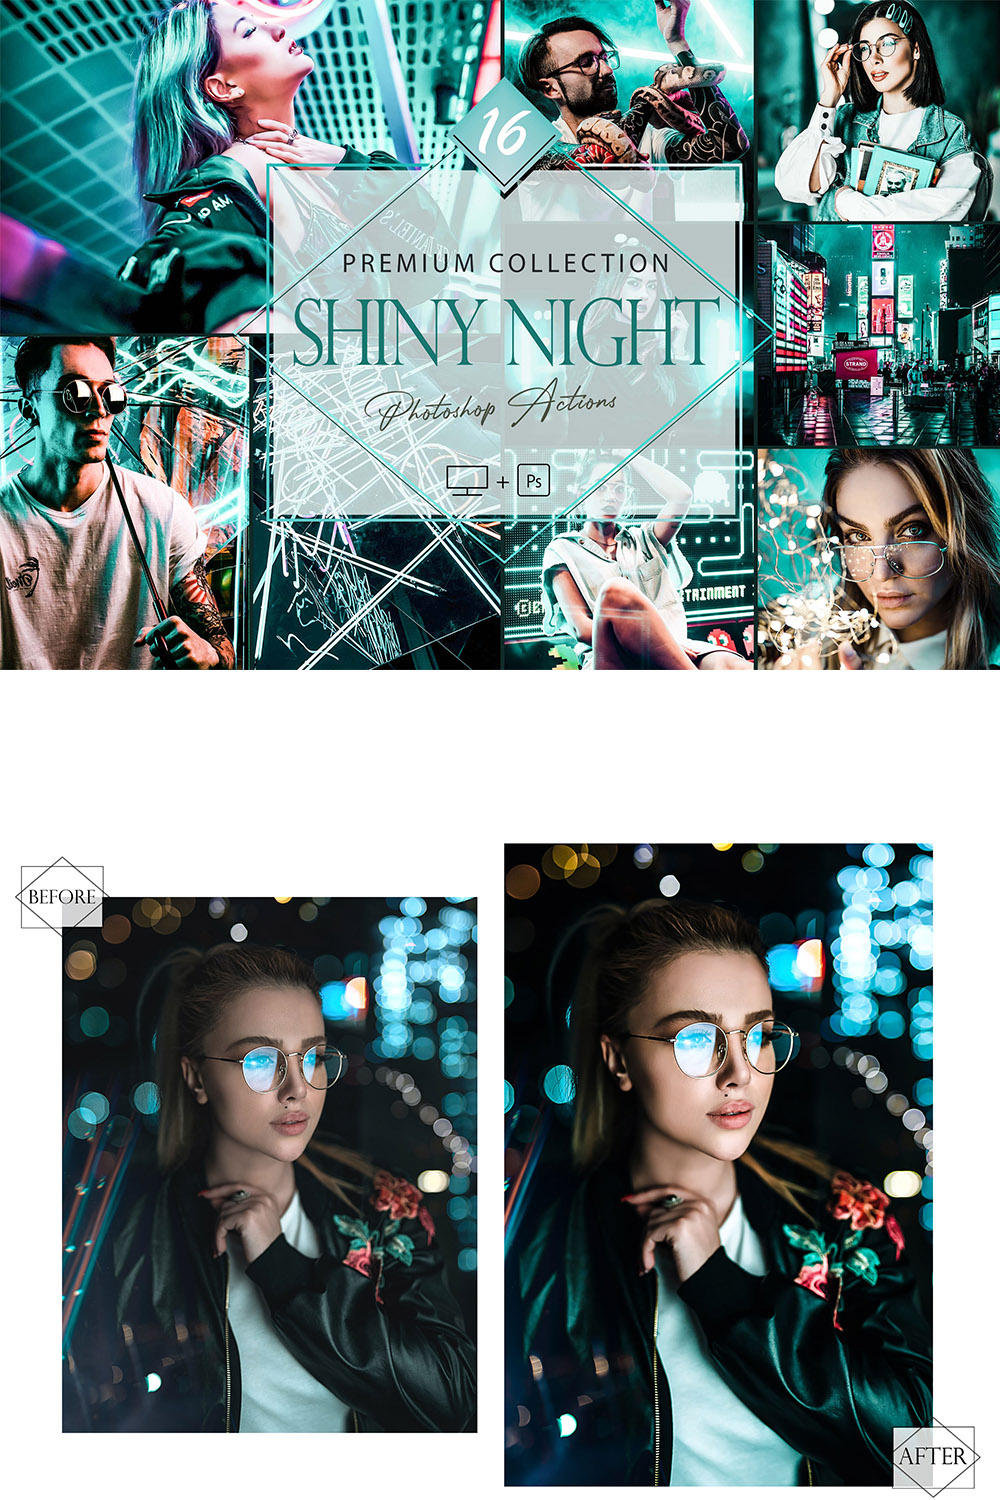 16 Photoshop Actions, Shiny Night Ps Action, Moody ACR Preset, Neon Filter, Lifestyle Theme For Instagram, Light Presets, Street Portrait pinterest preview image.